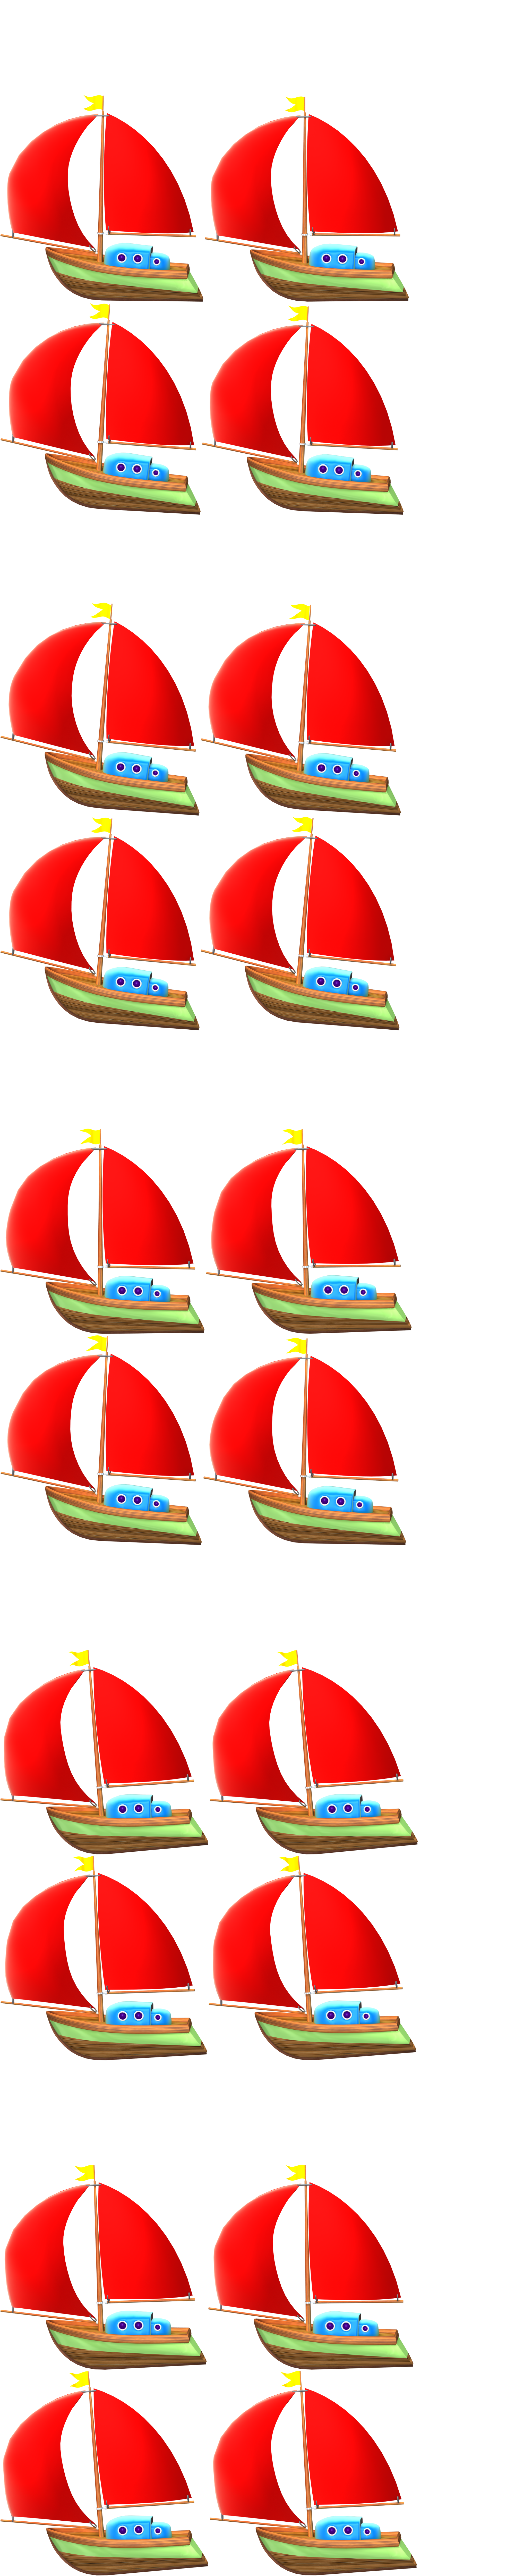 KID PIX 5: The STEAM Edition - Boat